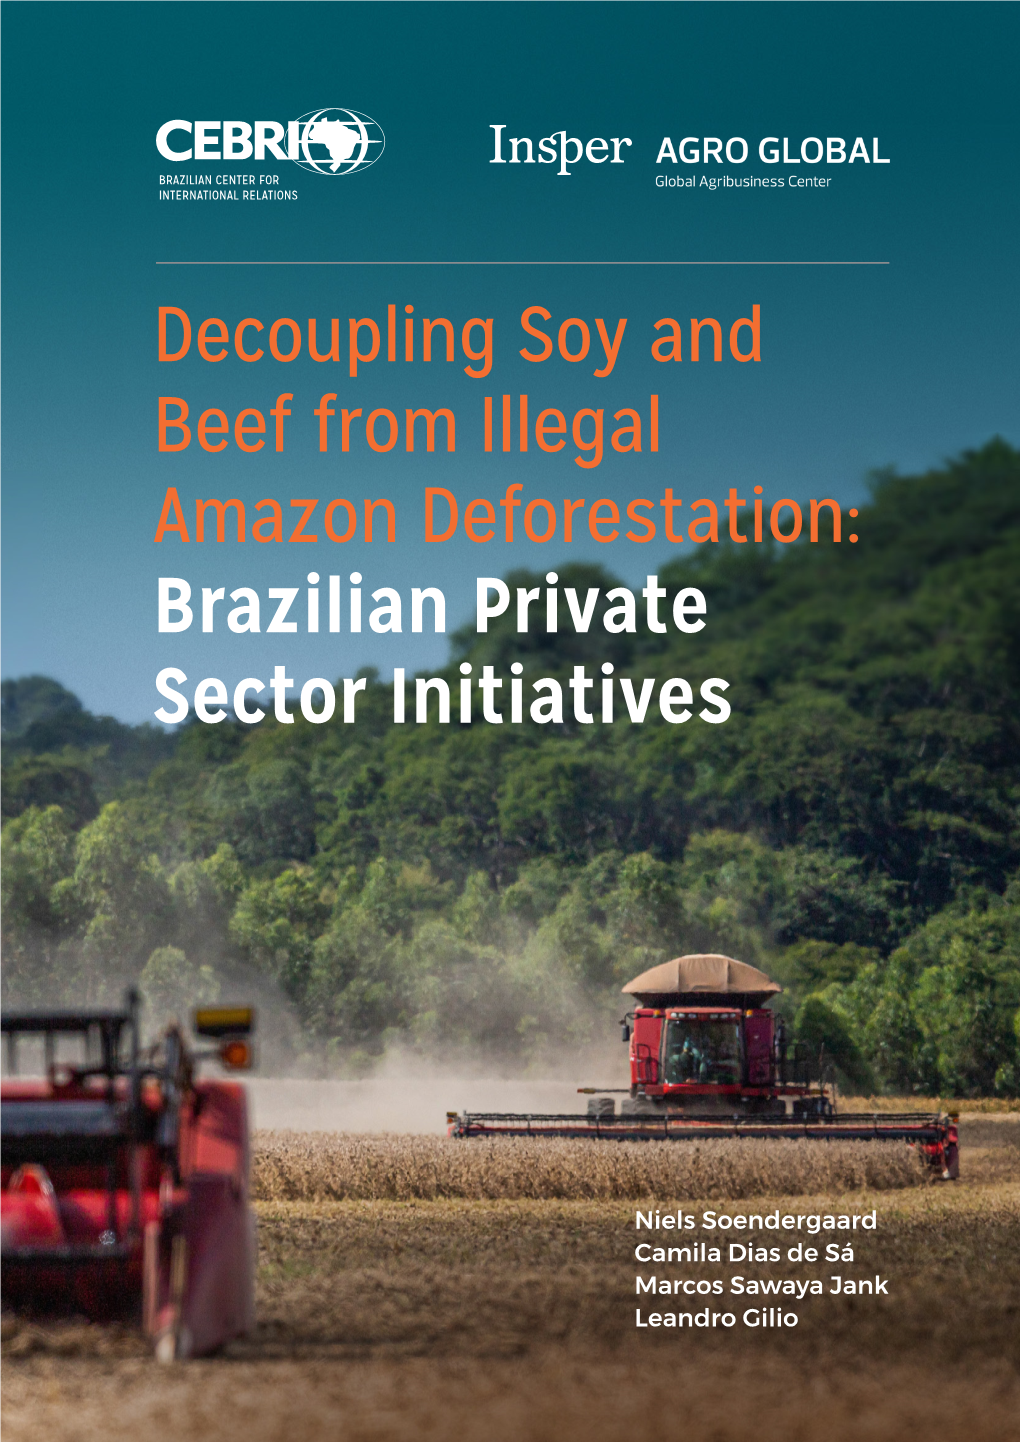 Decoupling Soy and Beef from Amazon Deforestation: Brazilian Private Sector Initiatives